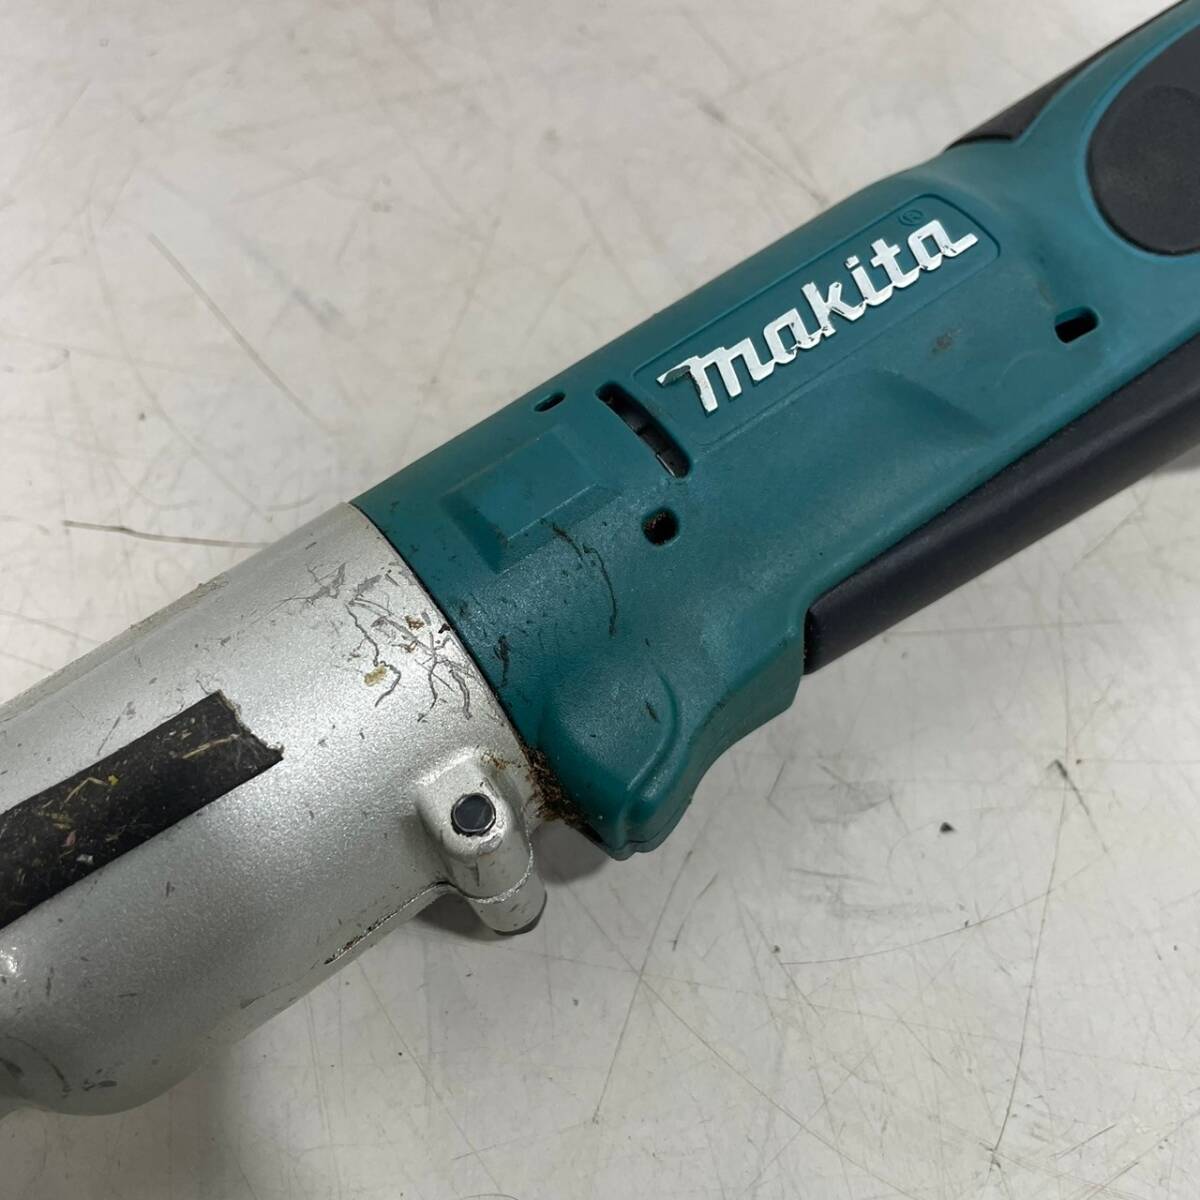 * animation equipped makita Makita rechargeable angle impact driver 14.4V TL060D charger,14.4v battery, bit attaching ..OK/ direct . possible h0427-6